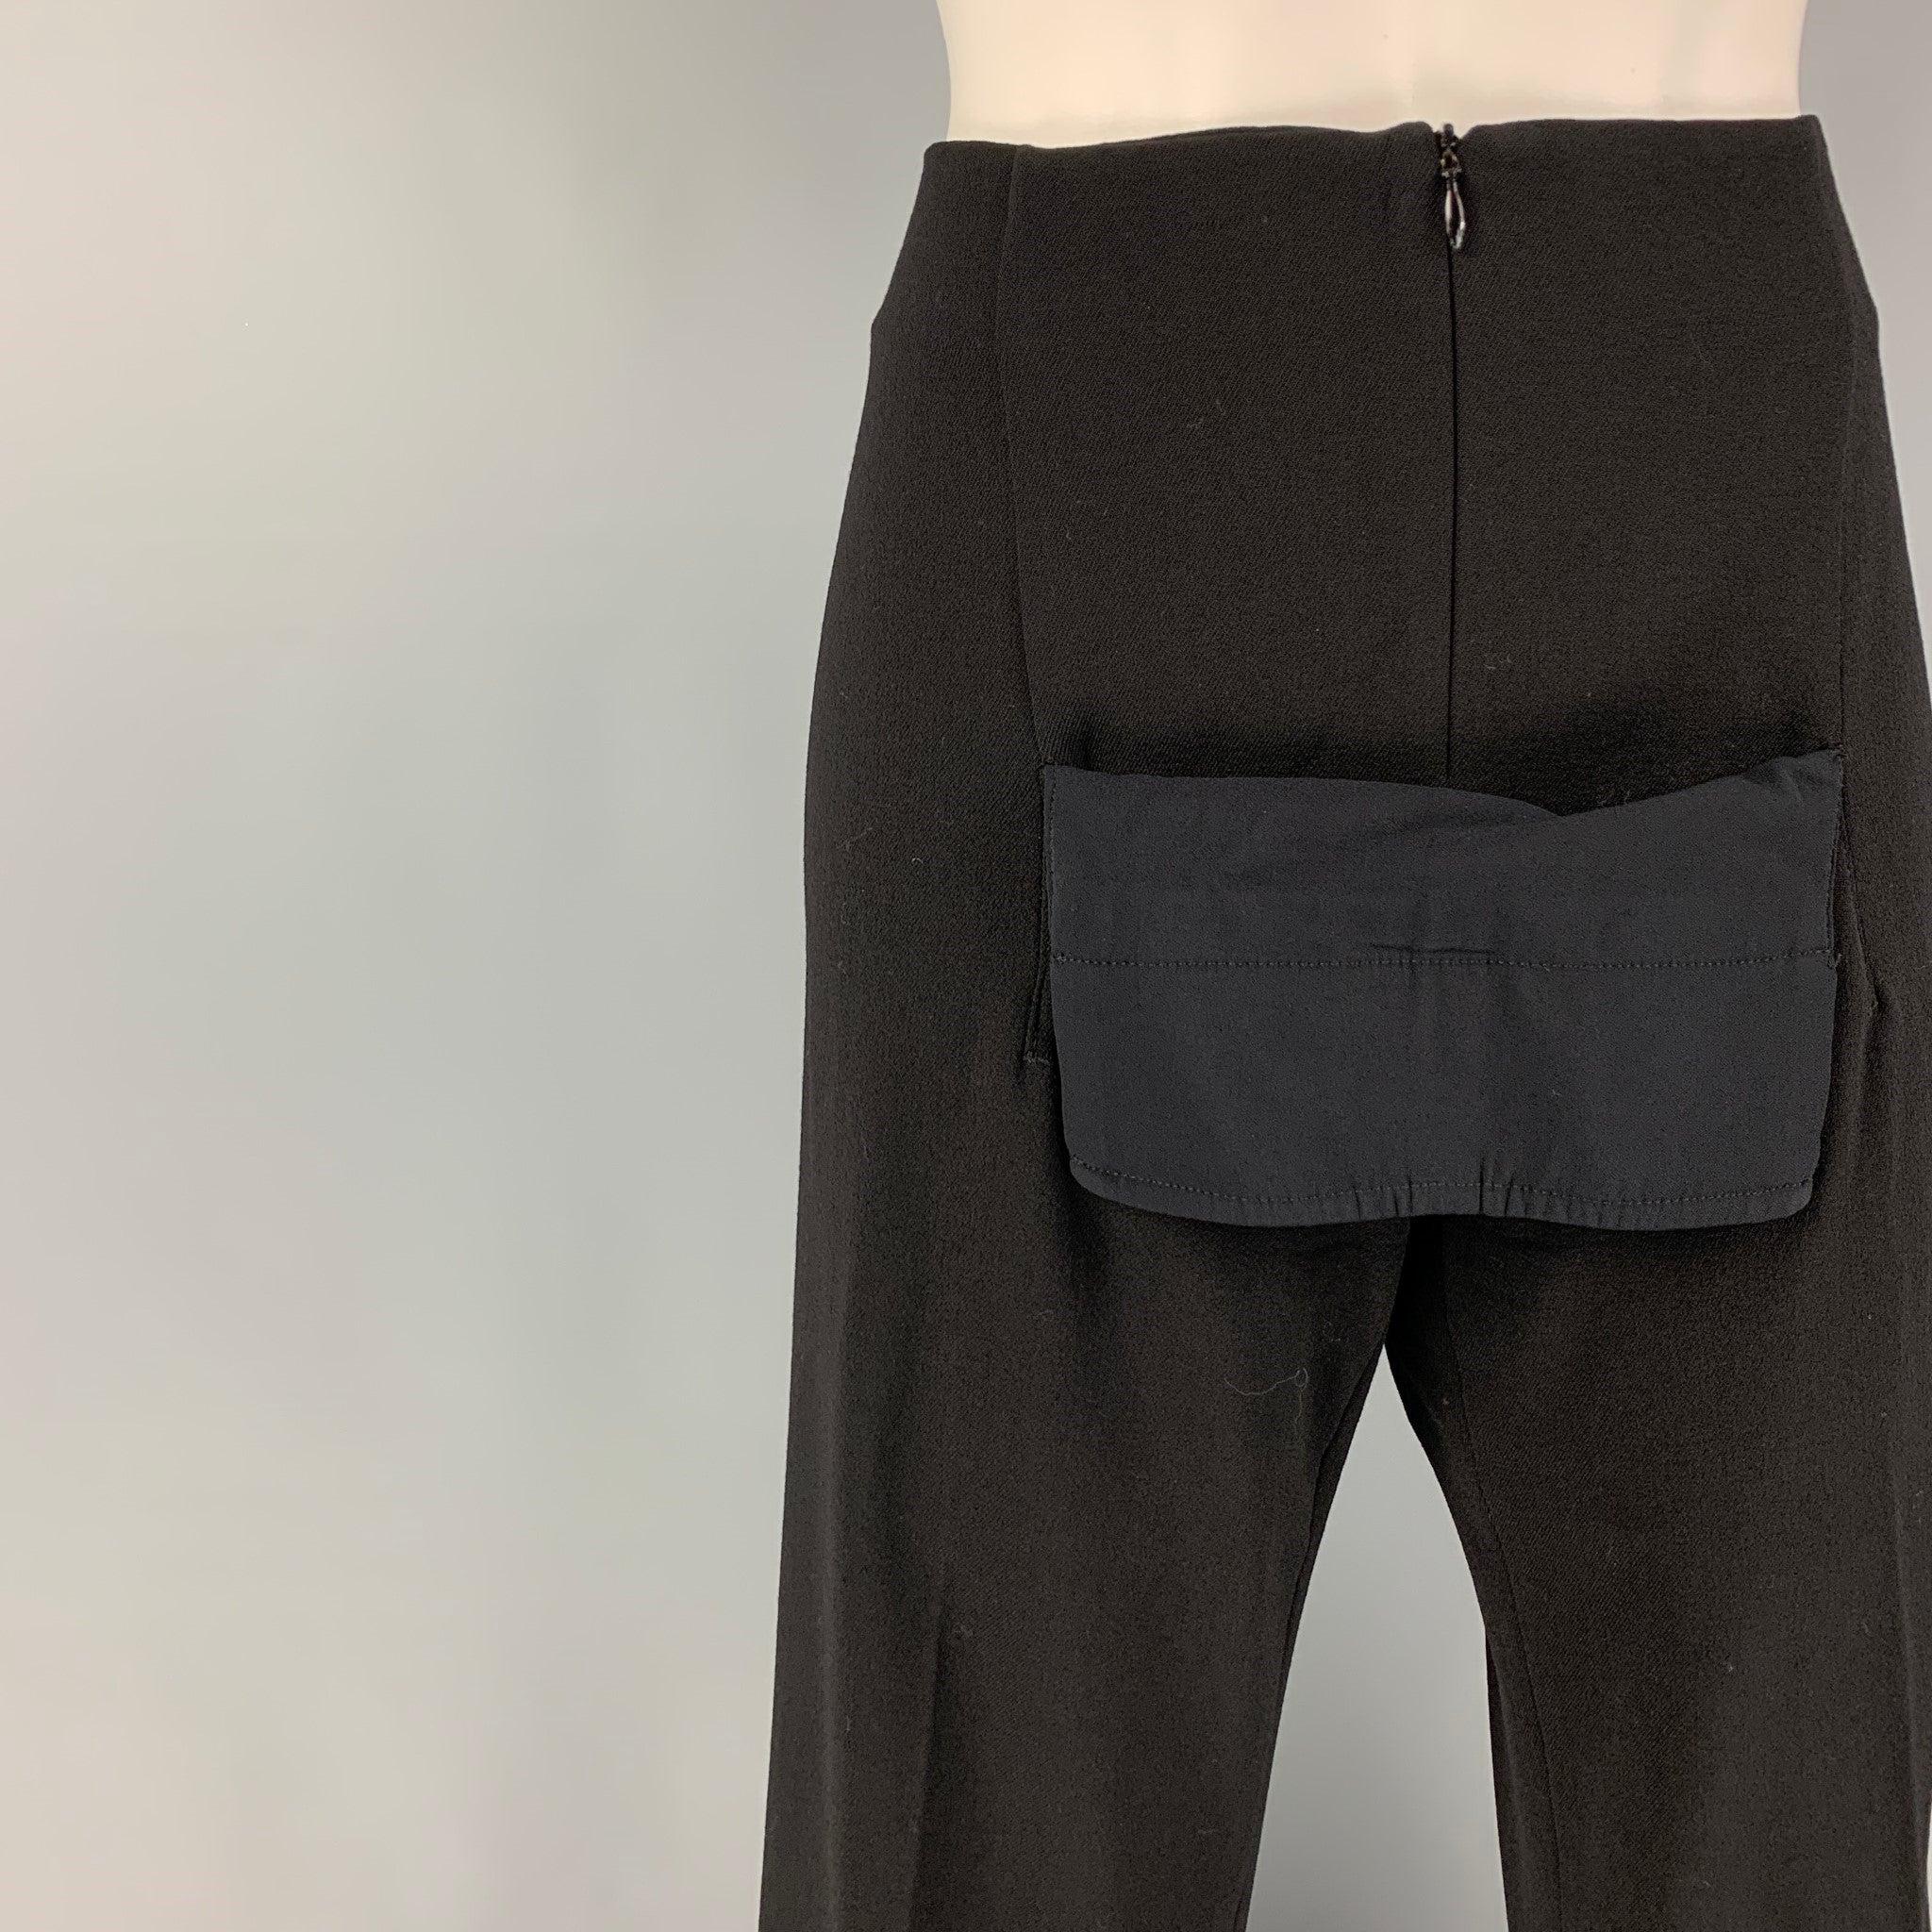 JEAN PAUL GAULTIER pants comes in a black wool / polyamide featuring a front panel design, wide leg, and a front zipper closure. Made in Italy.
Very Good
Pre-Owned Condition. 

Marked:   I 42 / D 38 / F 38 / GB 10 / USA 8 

Measurements: 
  Waist: